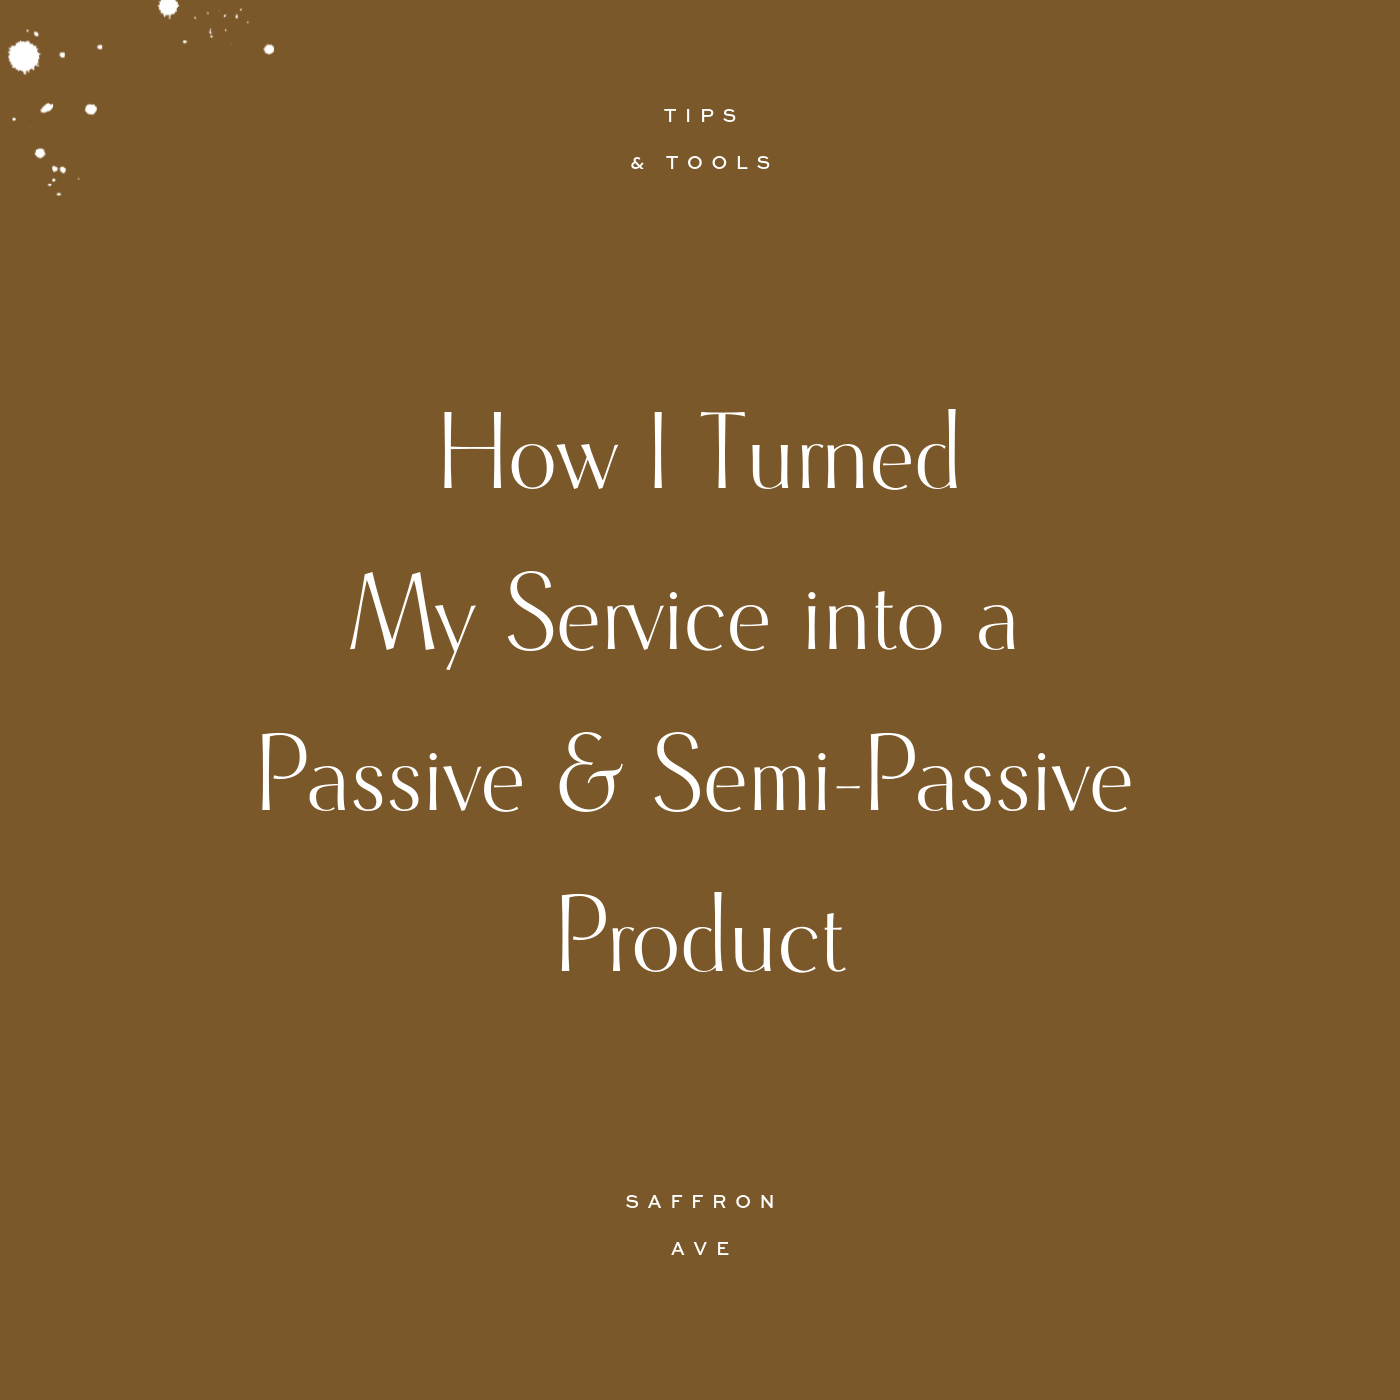 How I turned my design service into a passive product